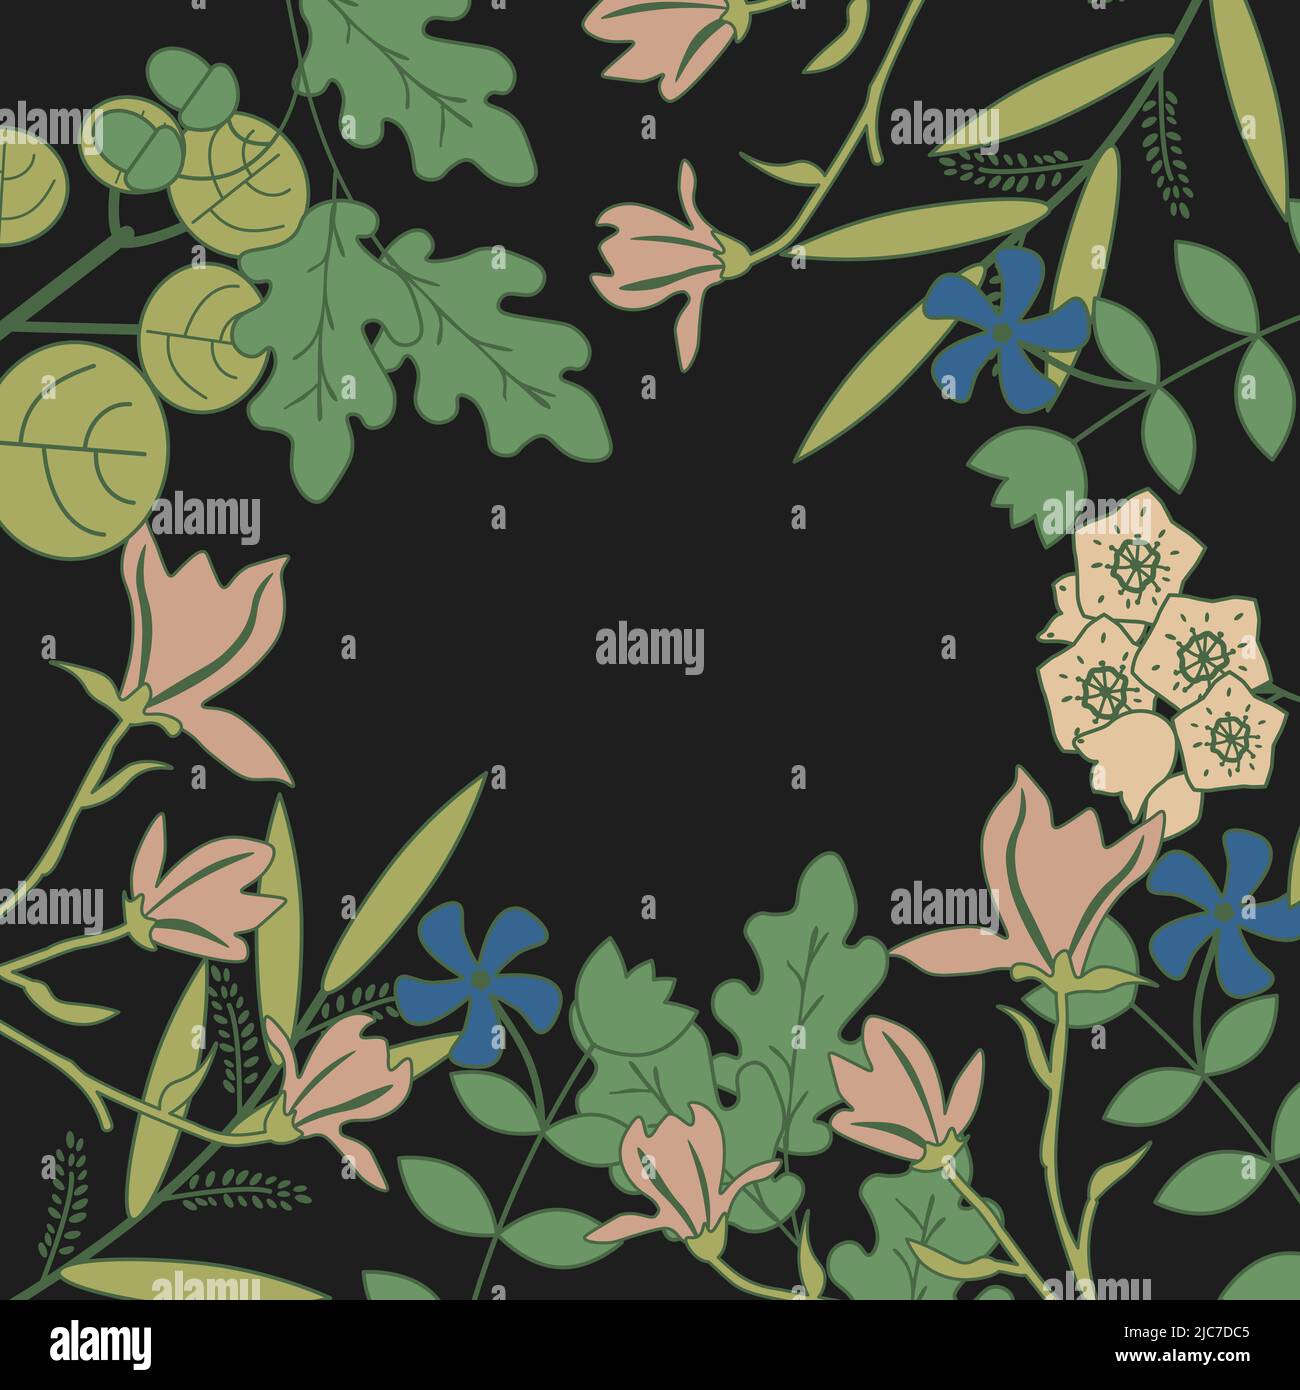 Template vector background with different plants Stock Vector